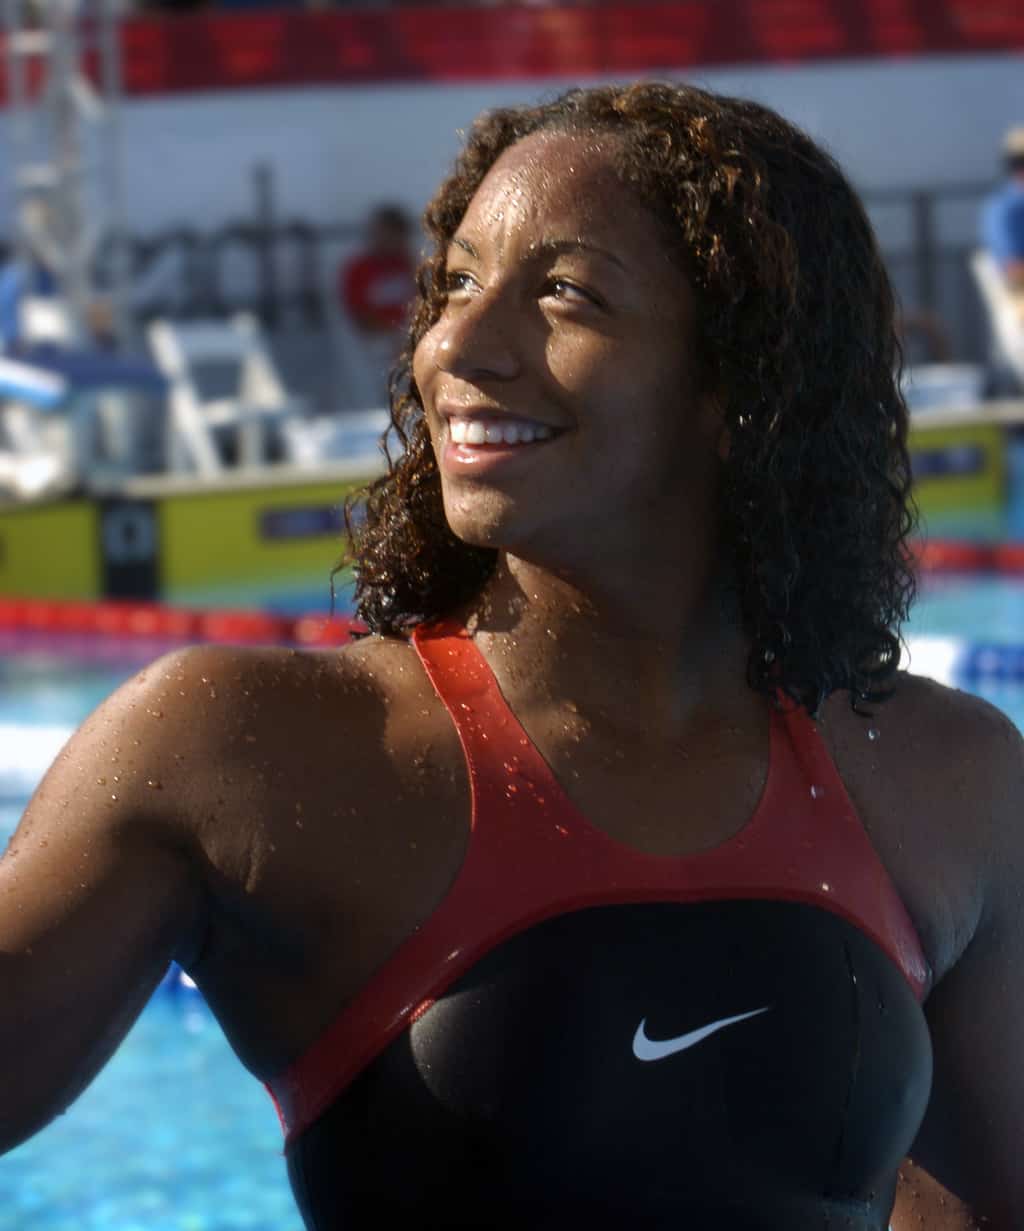 14 Jul 2004, Long Beach, California, United States --- Maritza Correia, the first African American woman to make the U.S. Olympic Women's Swim Team, smiles for the crowd after swimming the Women's 50 meter Freestyle final with a time of 25.15 at the U.S. Olympic Team Trials in Long Beach, California. --- Image by © Steven Georges/Press-Telegram/Corbis